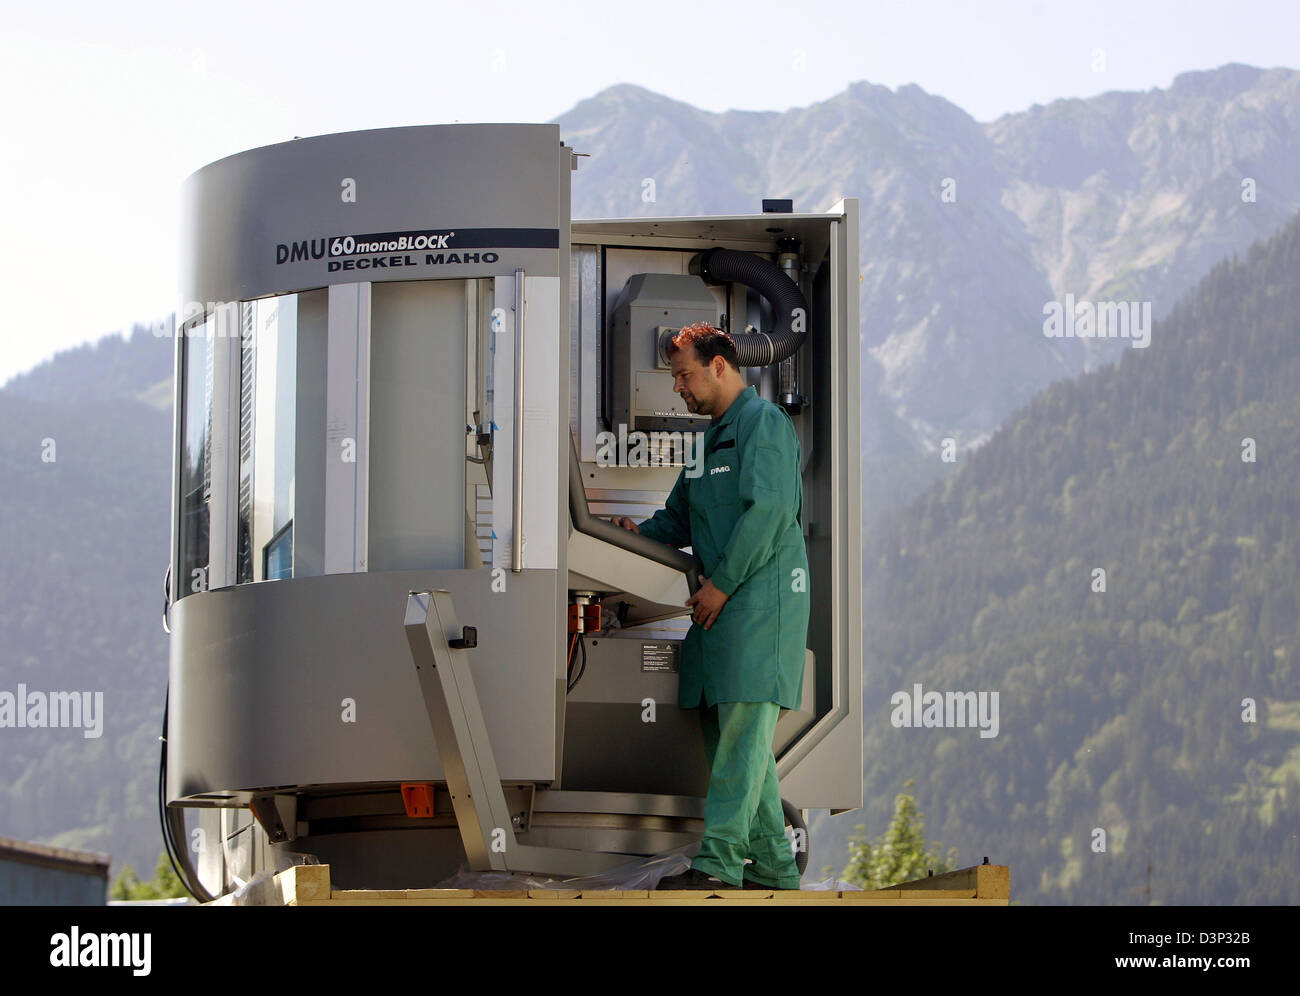 Armin Schneider, employee of 'Deckel Maho', part of the Gildemeister company, installs a control console of the CNC milling machine DMU 60 monoBlock in Pfronten, Germany, Wednesday, 19 July 2006. Photo: Bernd Thissen Stock Photo